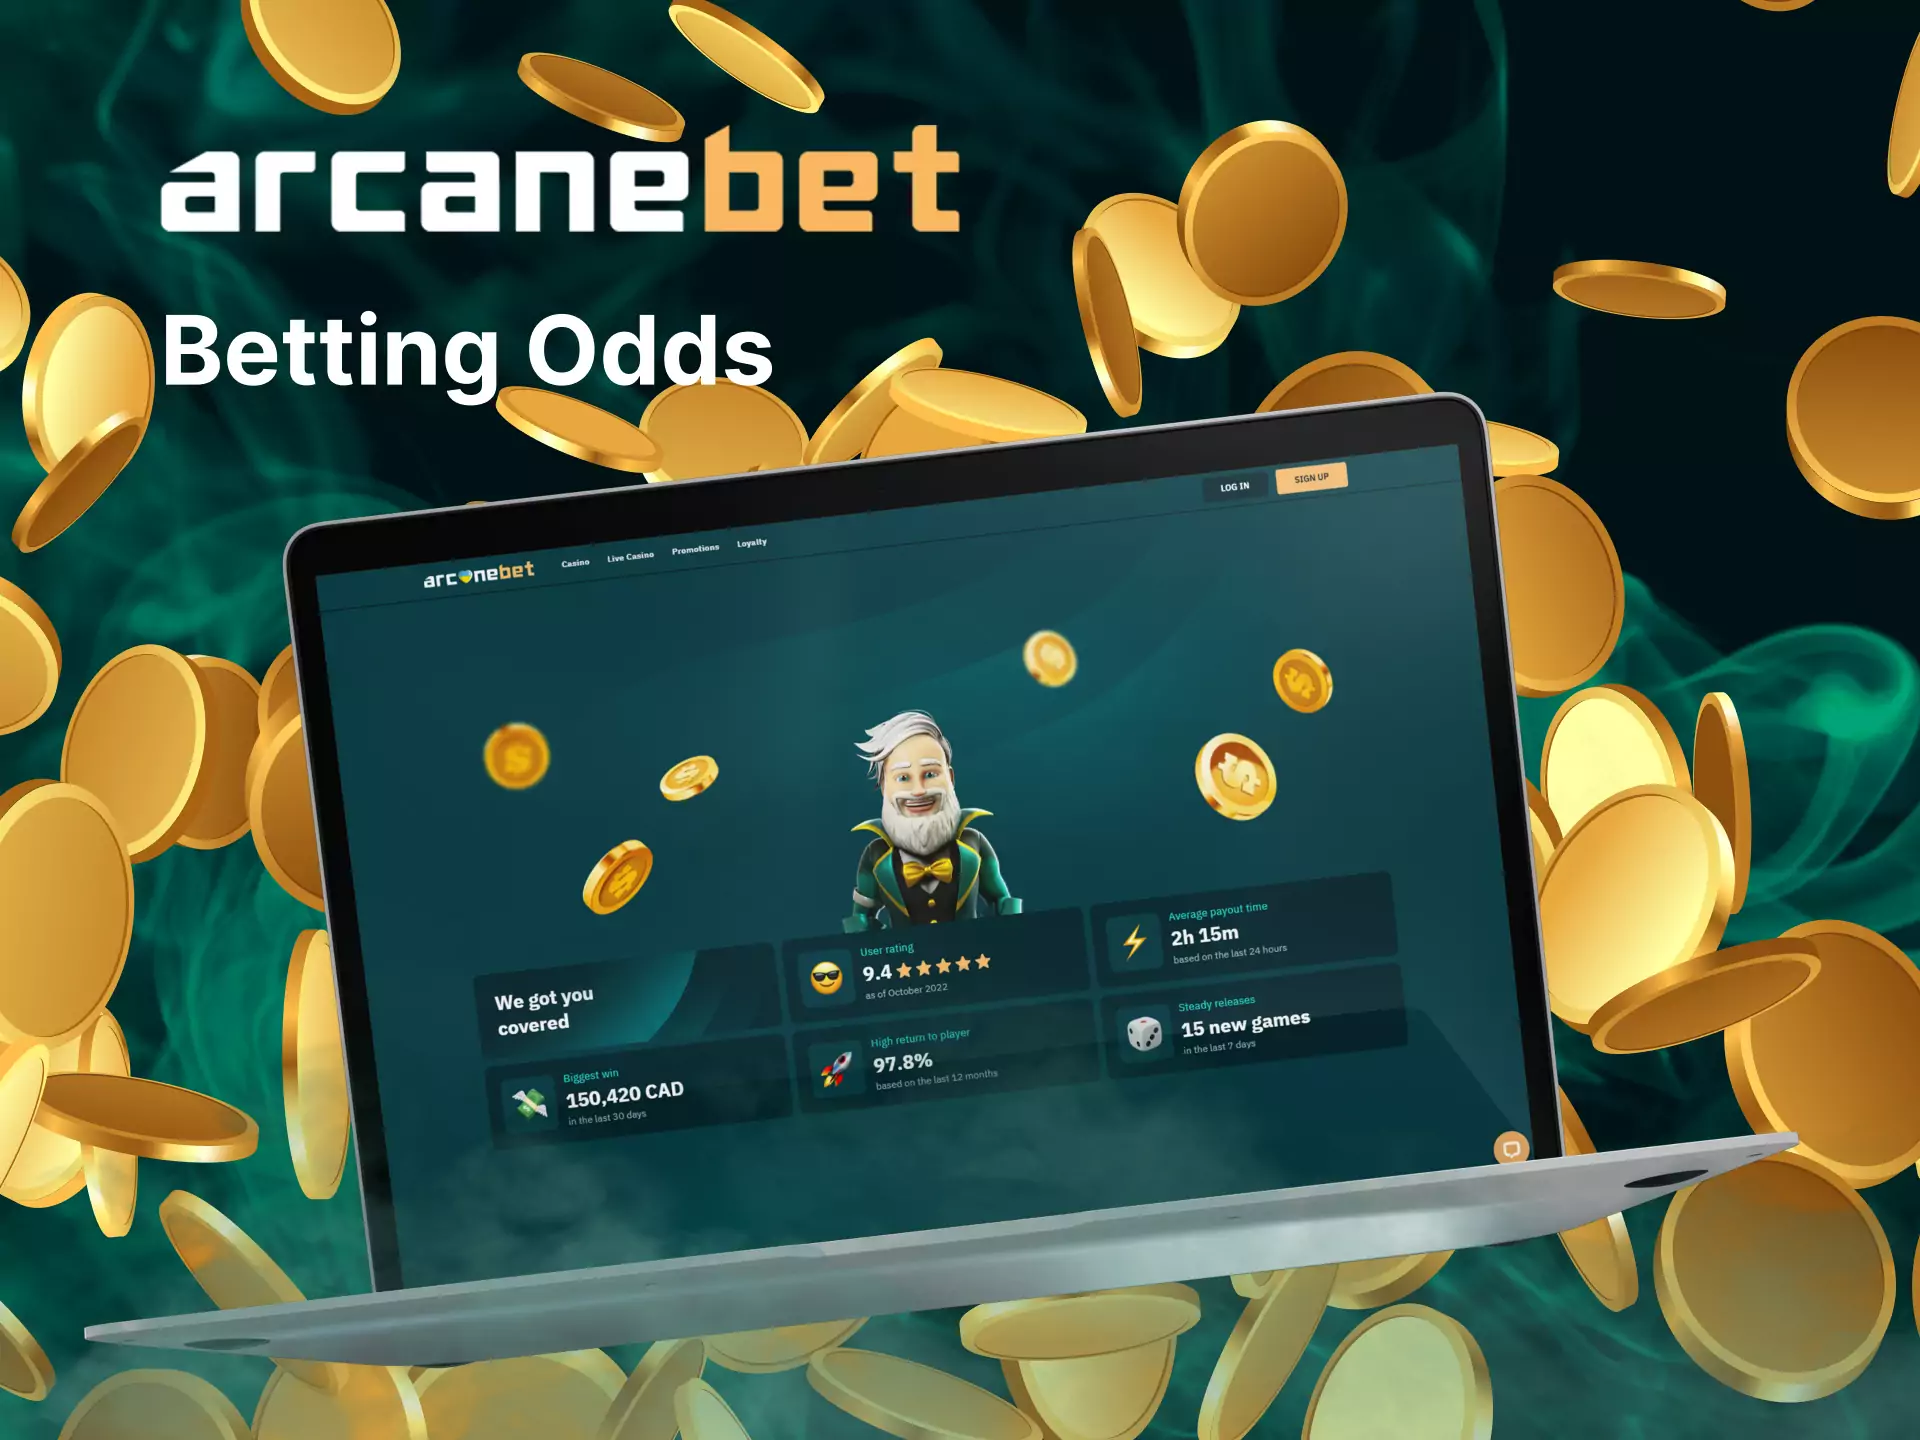 Arcanebet offers high odds for sporting events for all users.